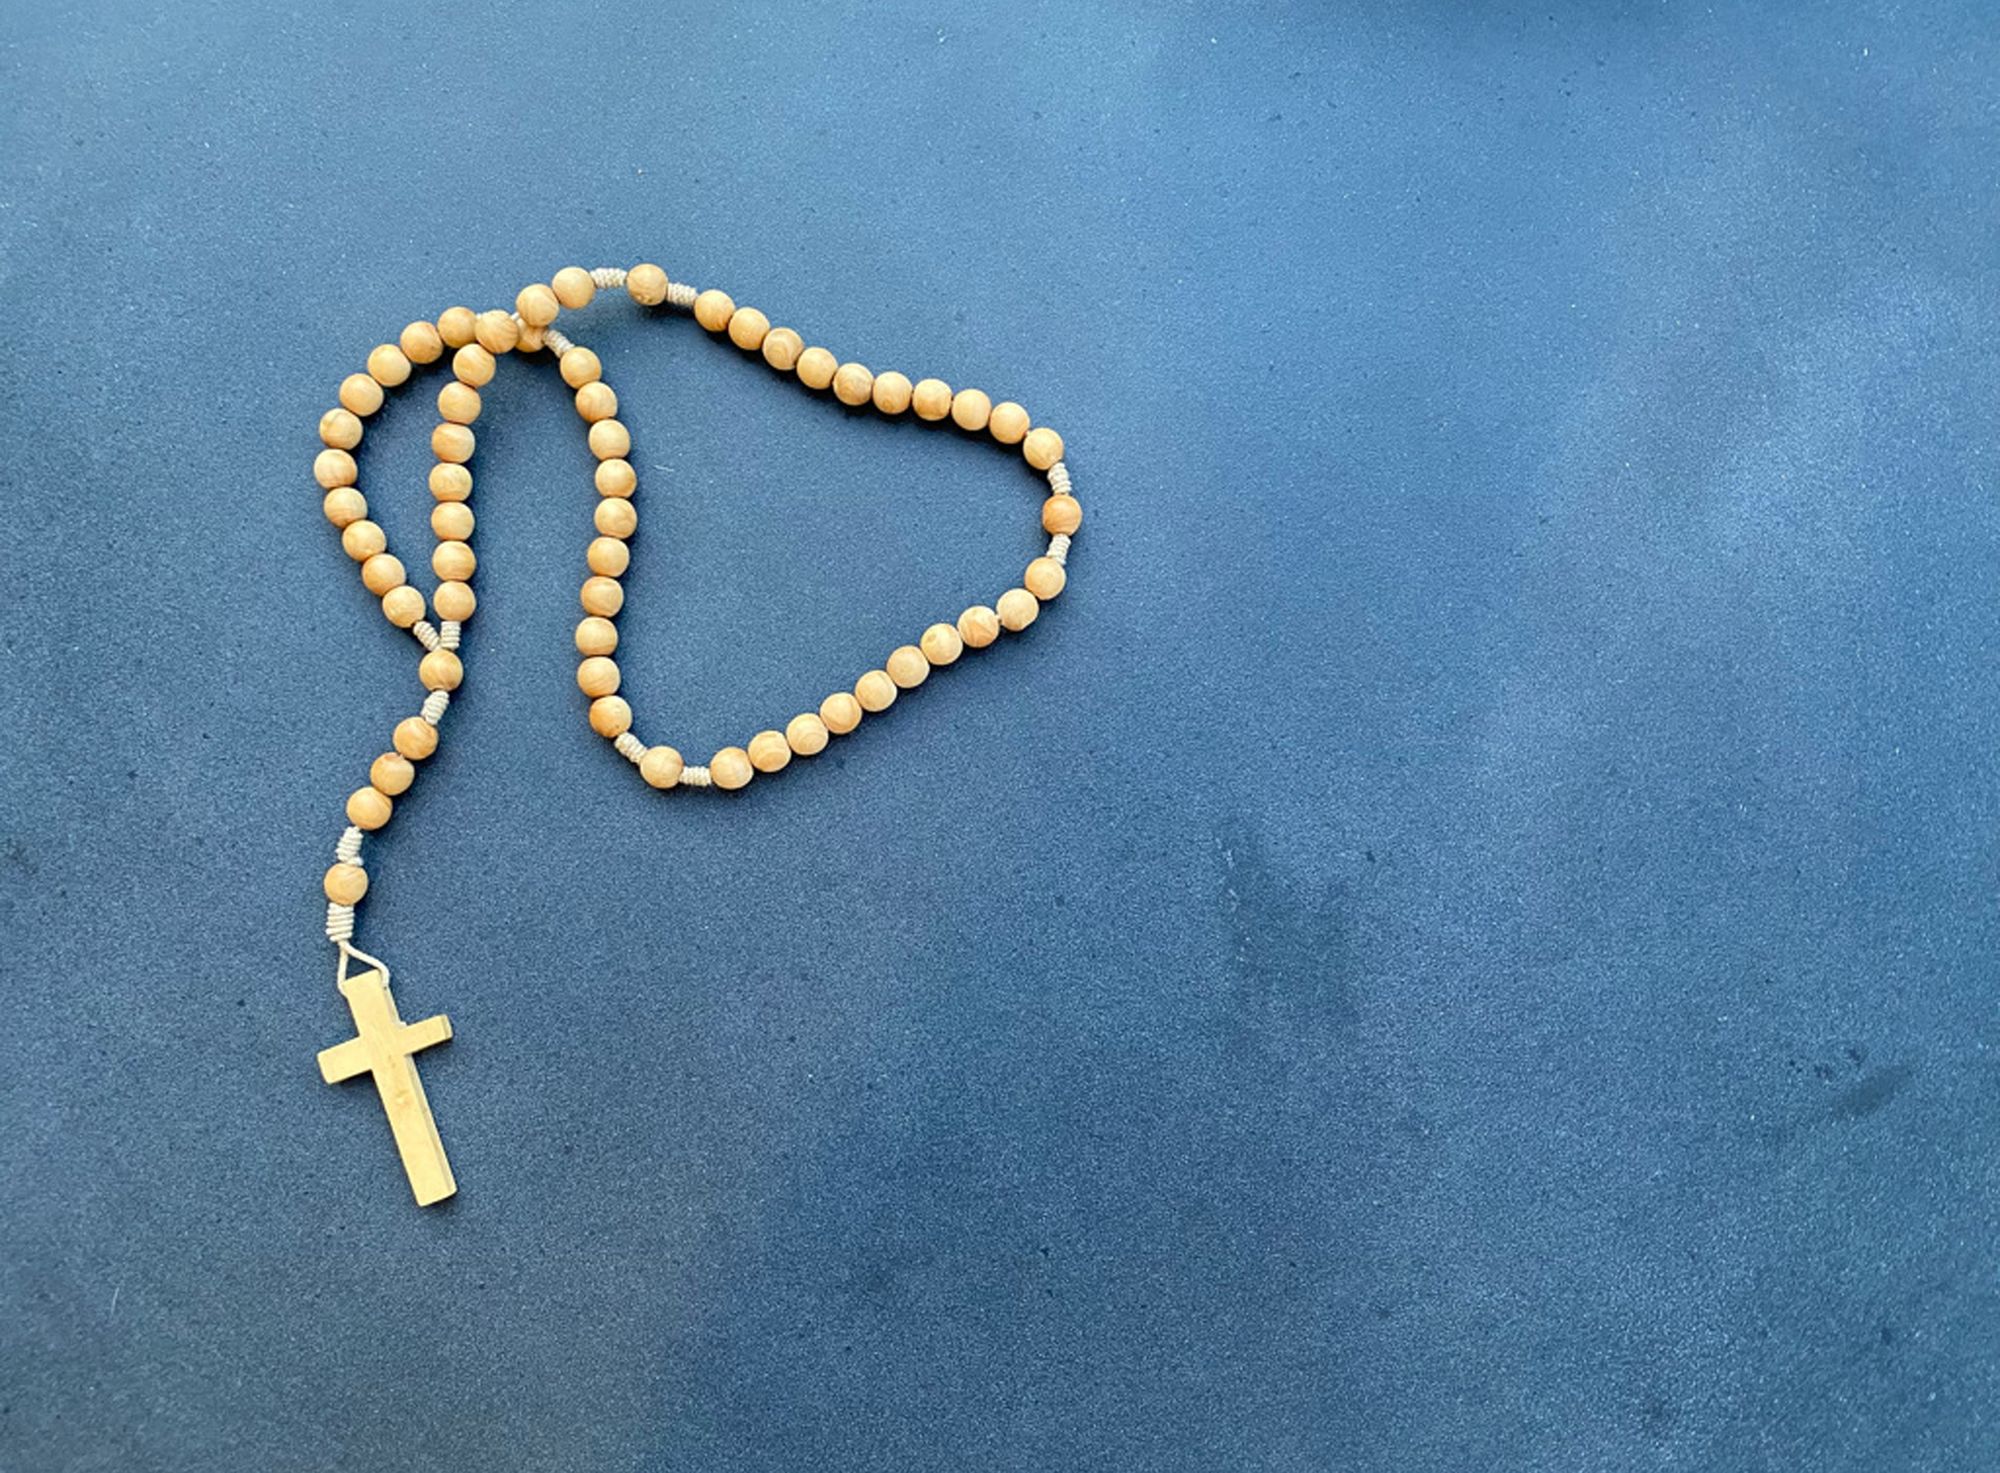 2023 Pro-Life Rosary Schedule